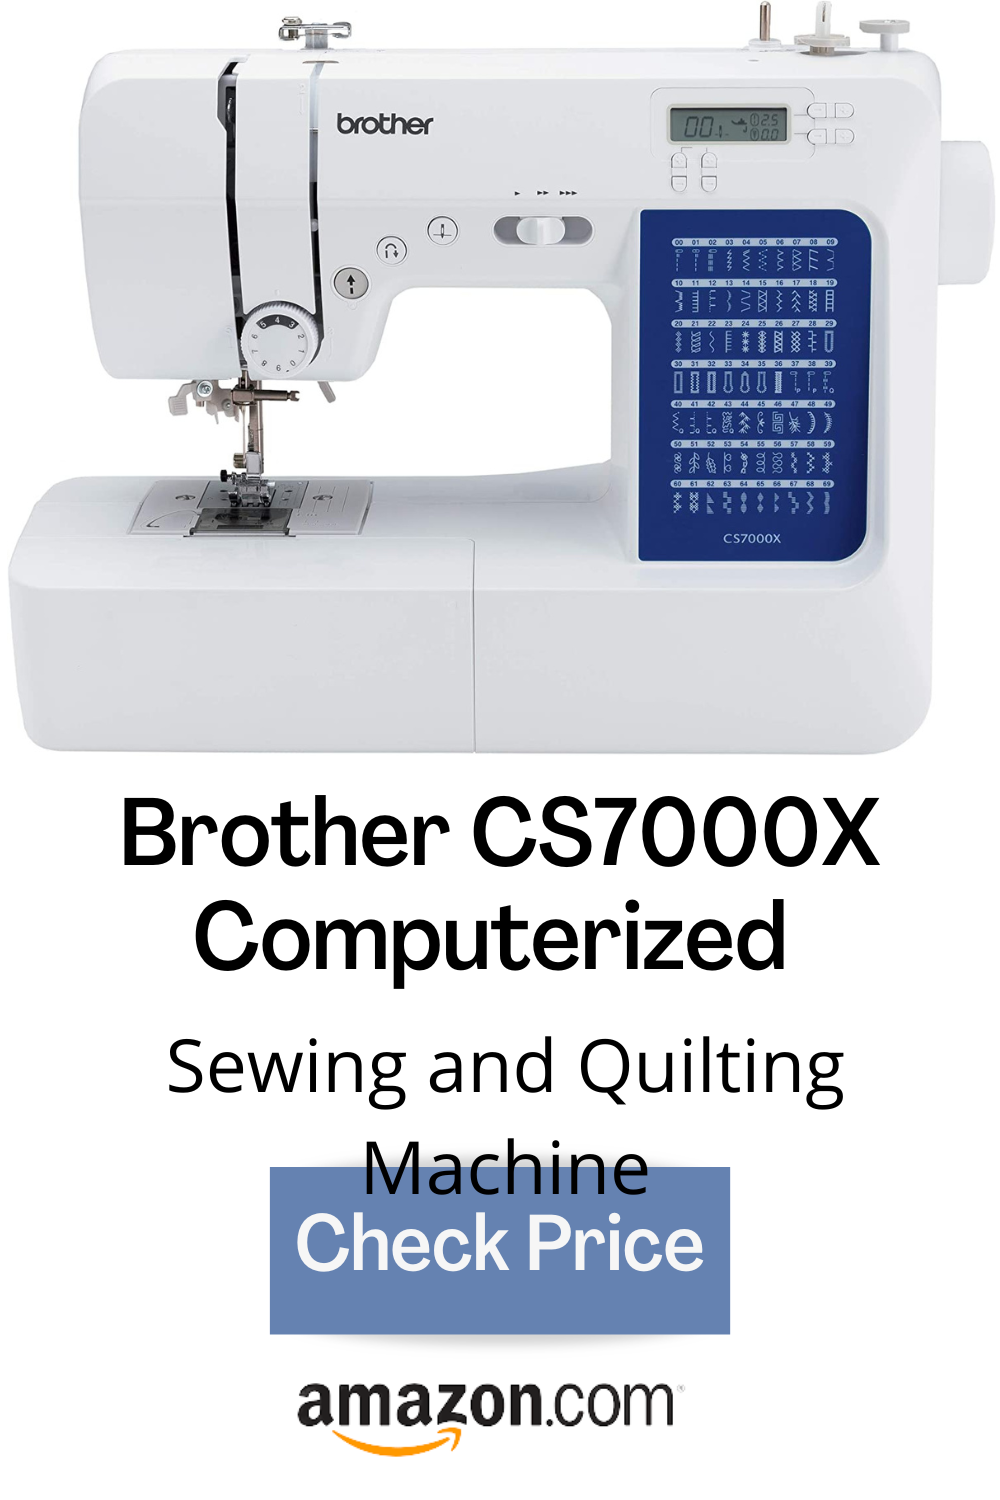 5 of the best recommended sewing machines for beginner quilters